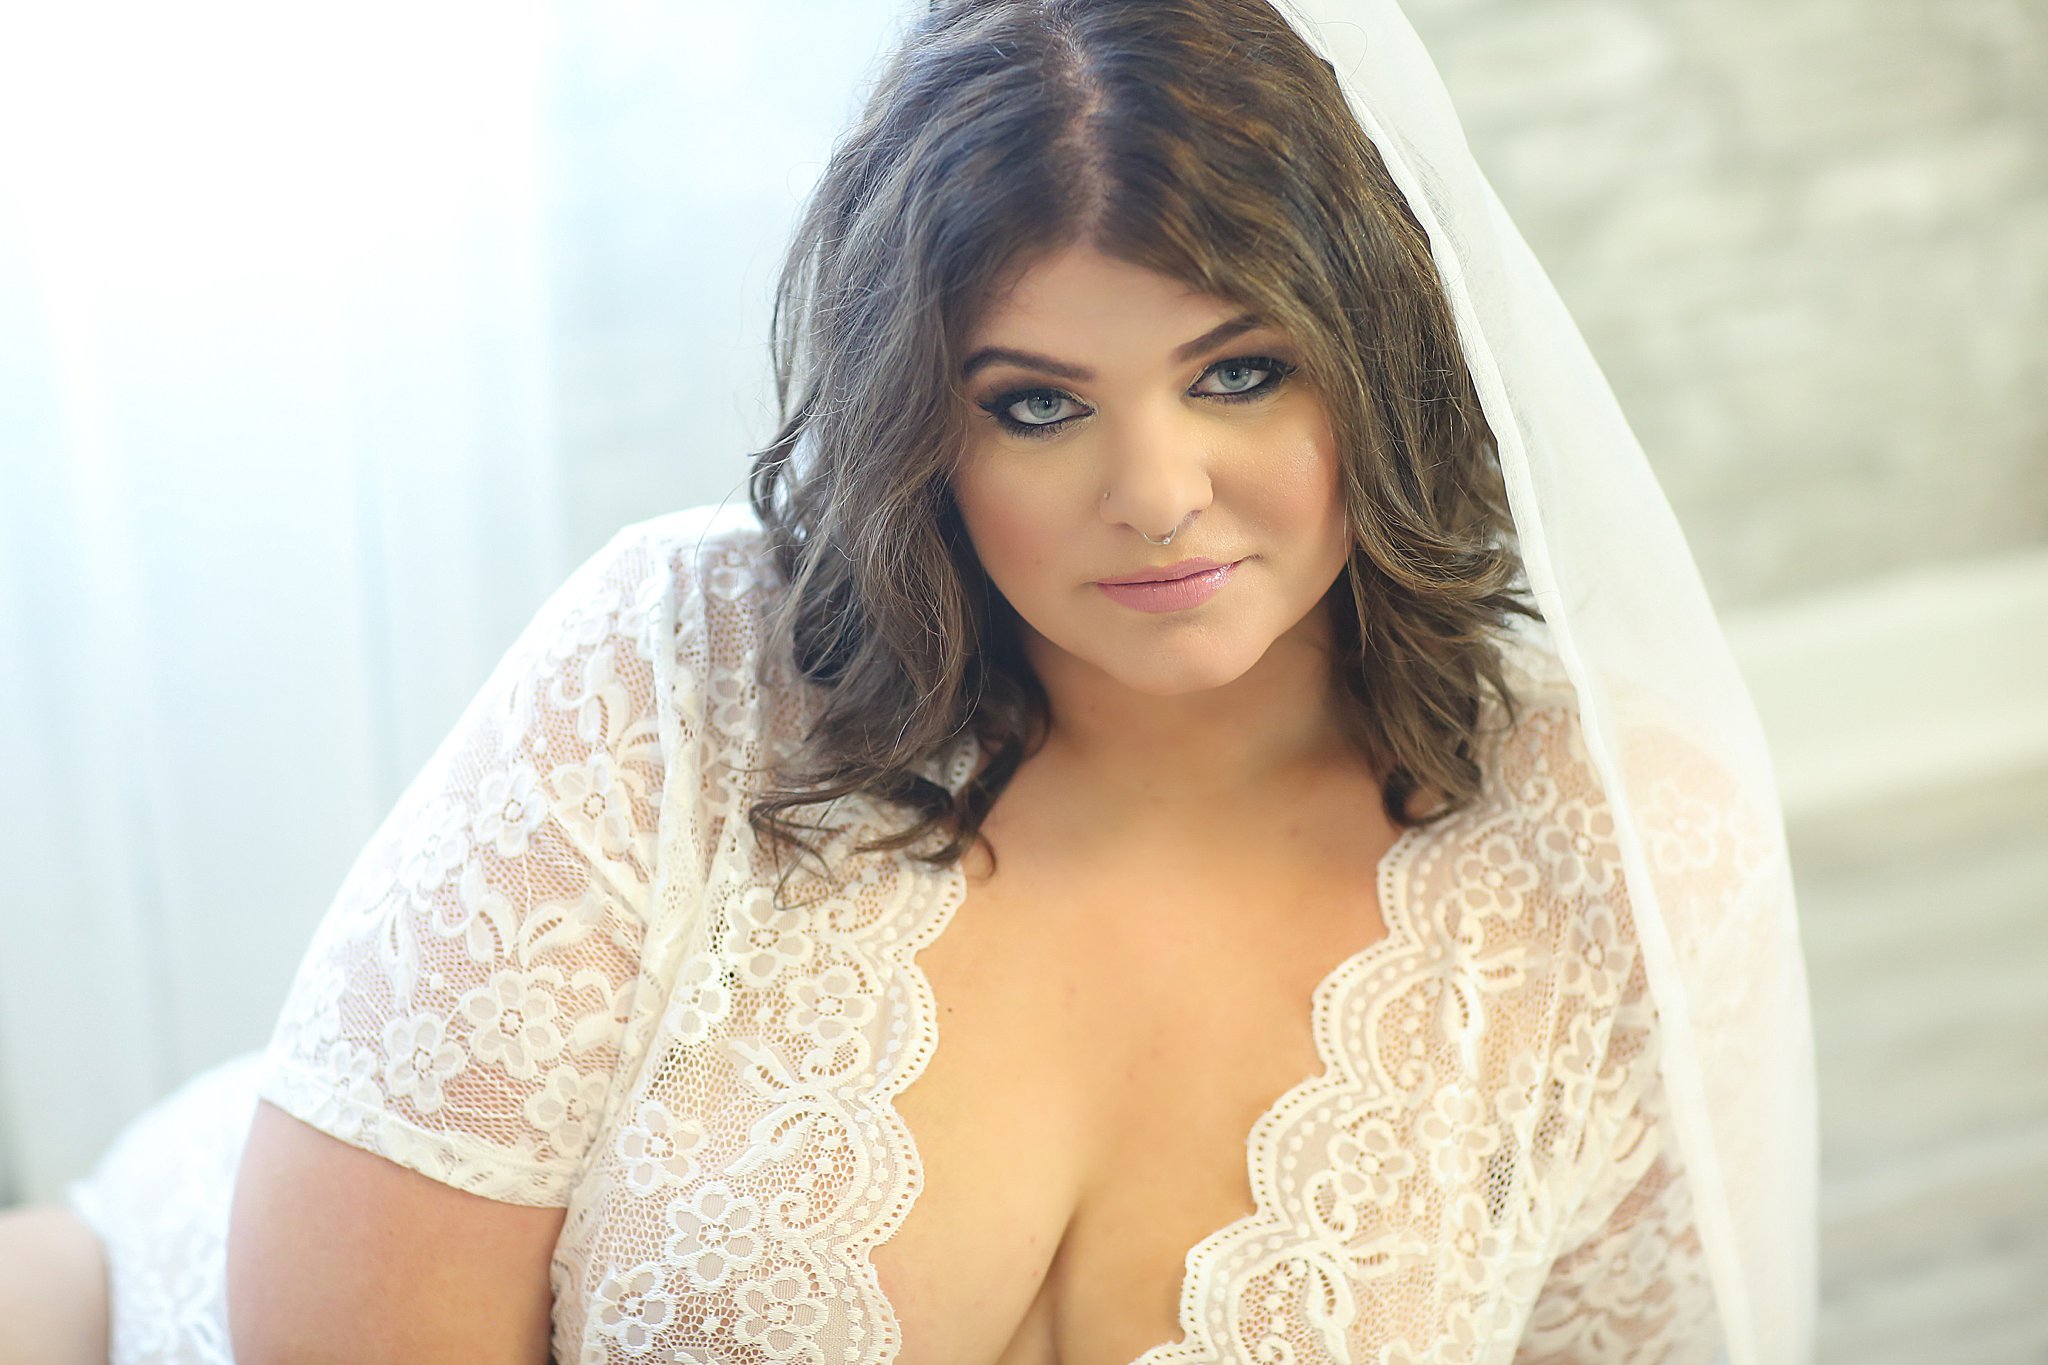 13 Bridal Boudoir Photography Tips & Ideas for Brides-to-Be